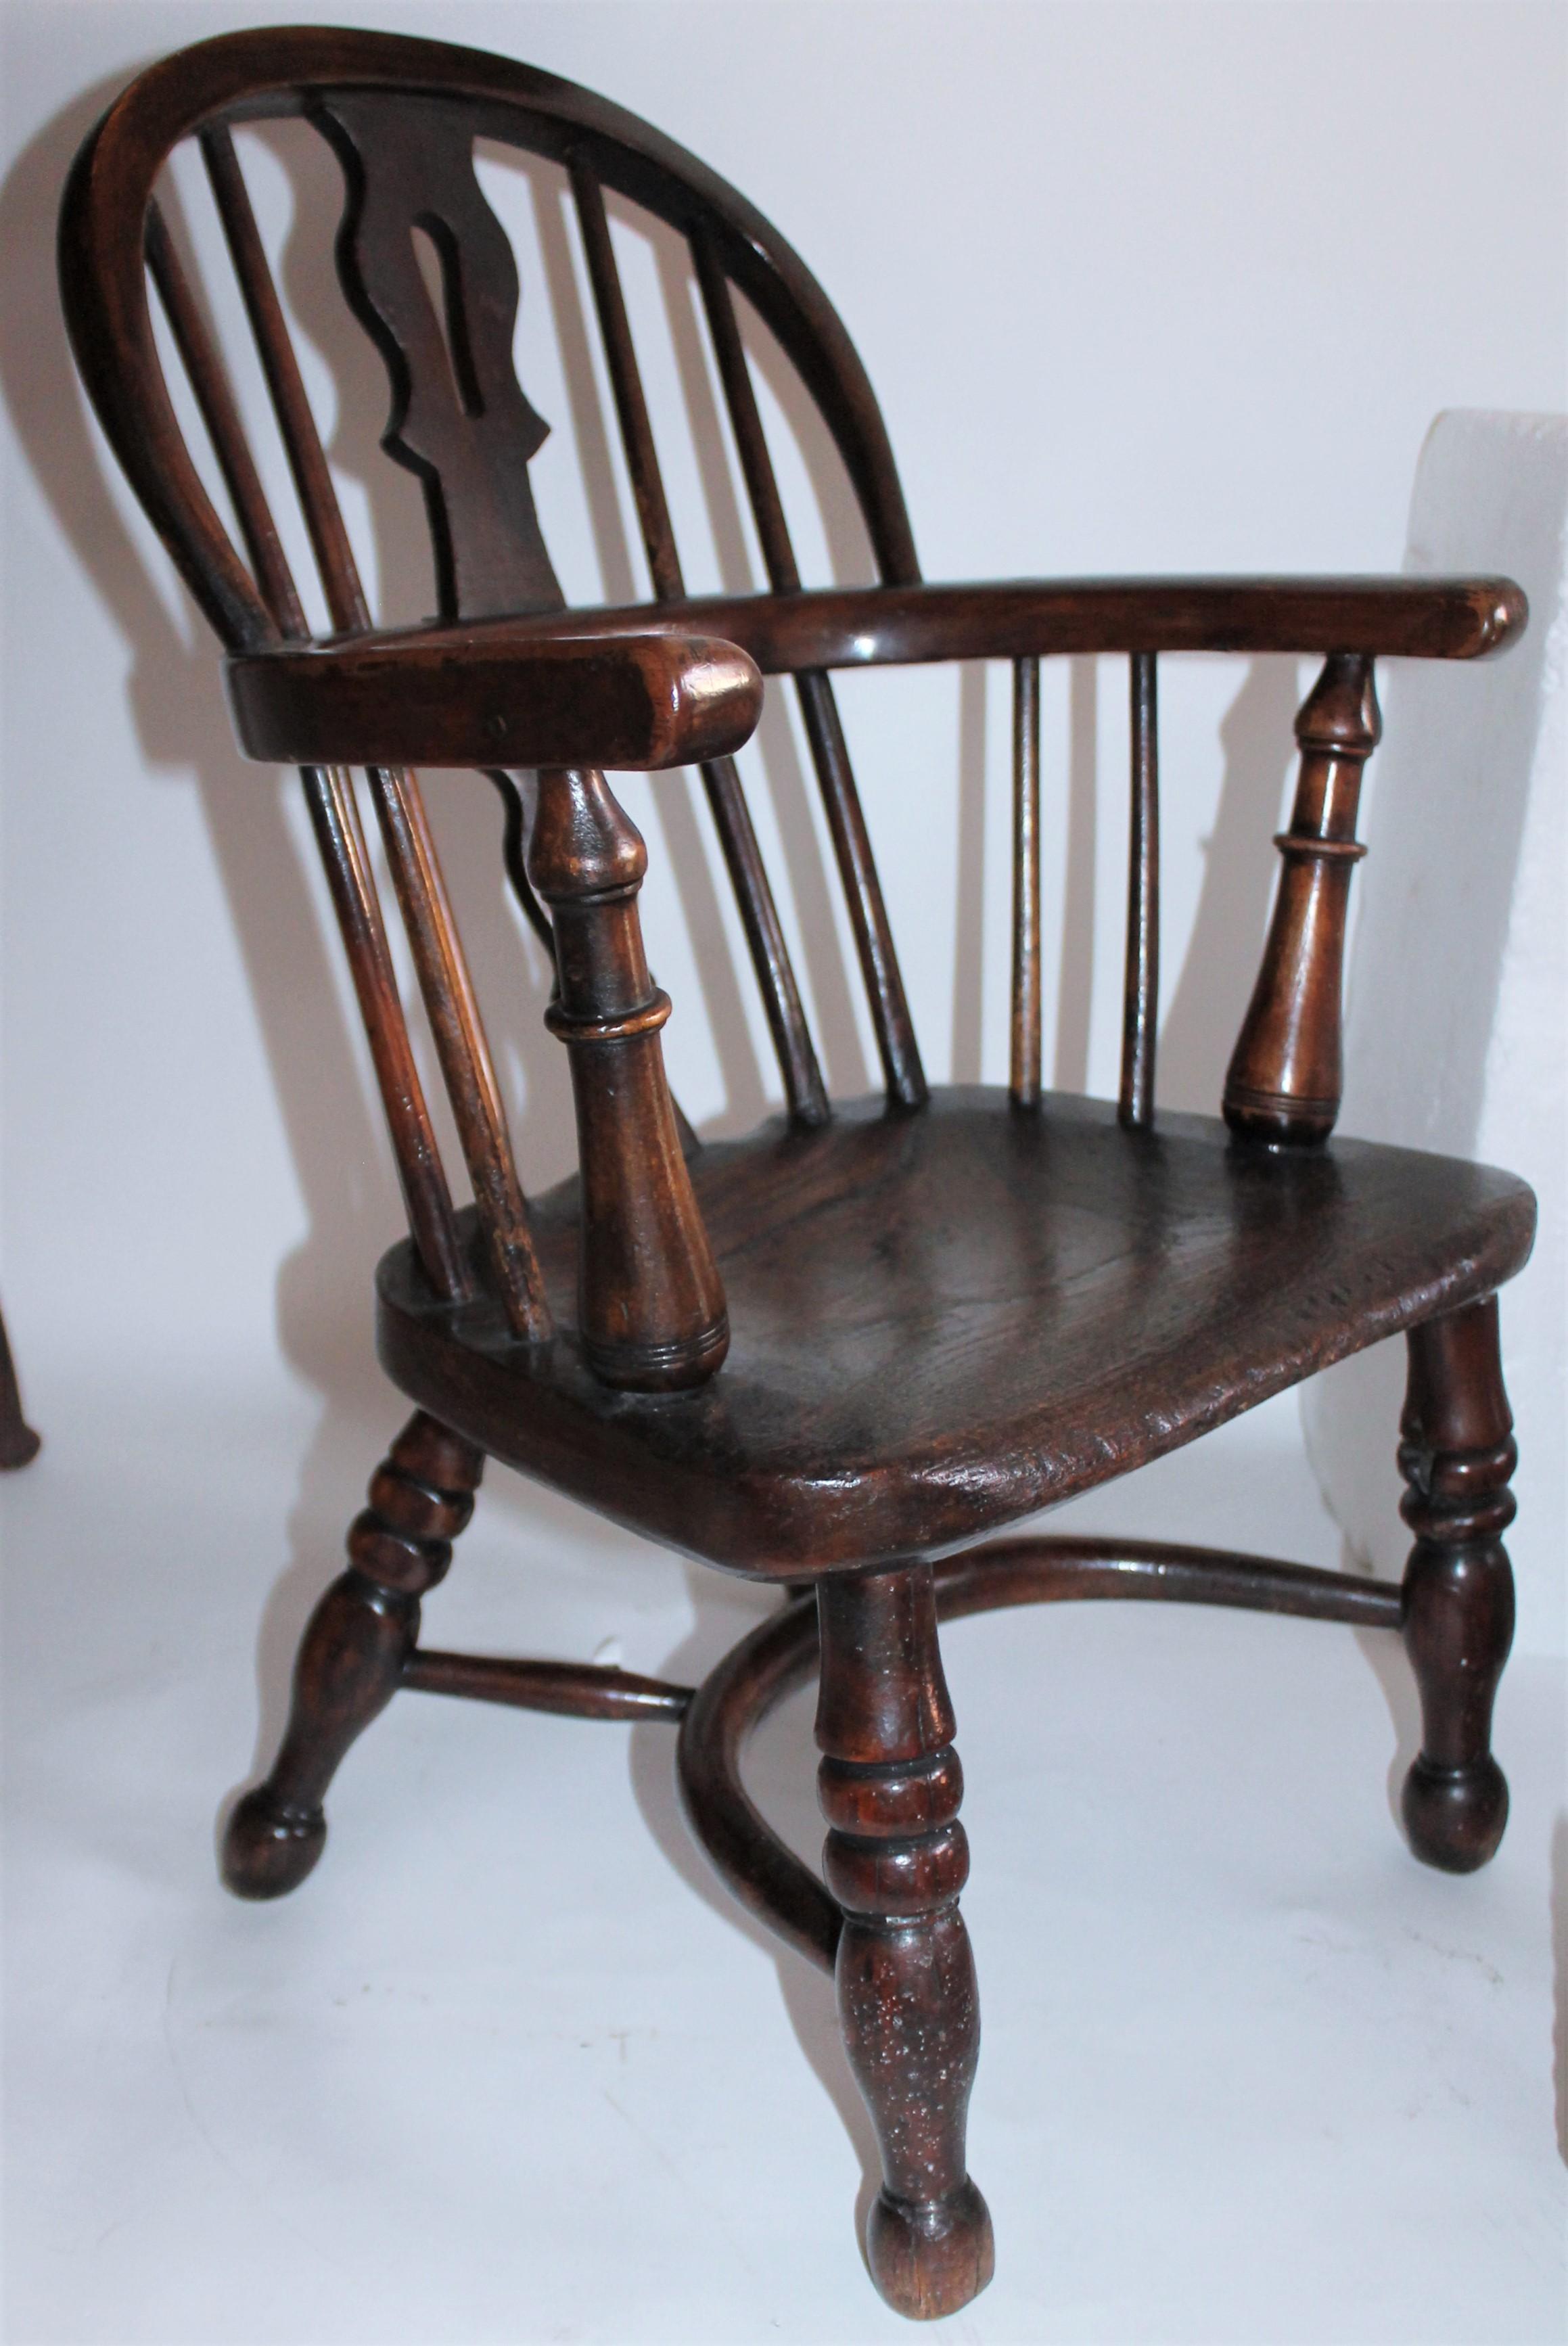 19th century early English children's Windsor extended arm plank bottom chair. The condition is very good and sturdy.